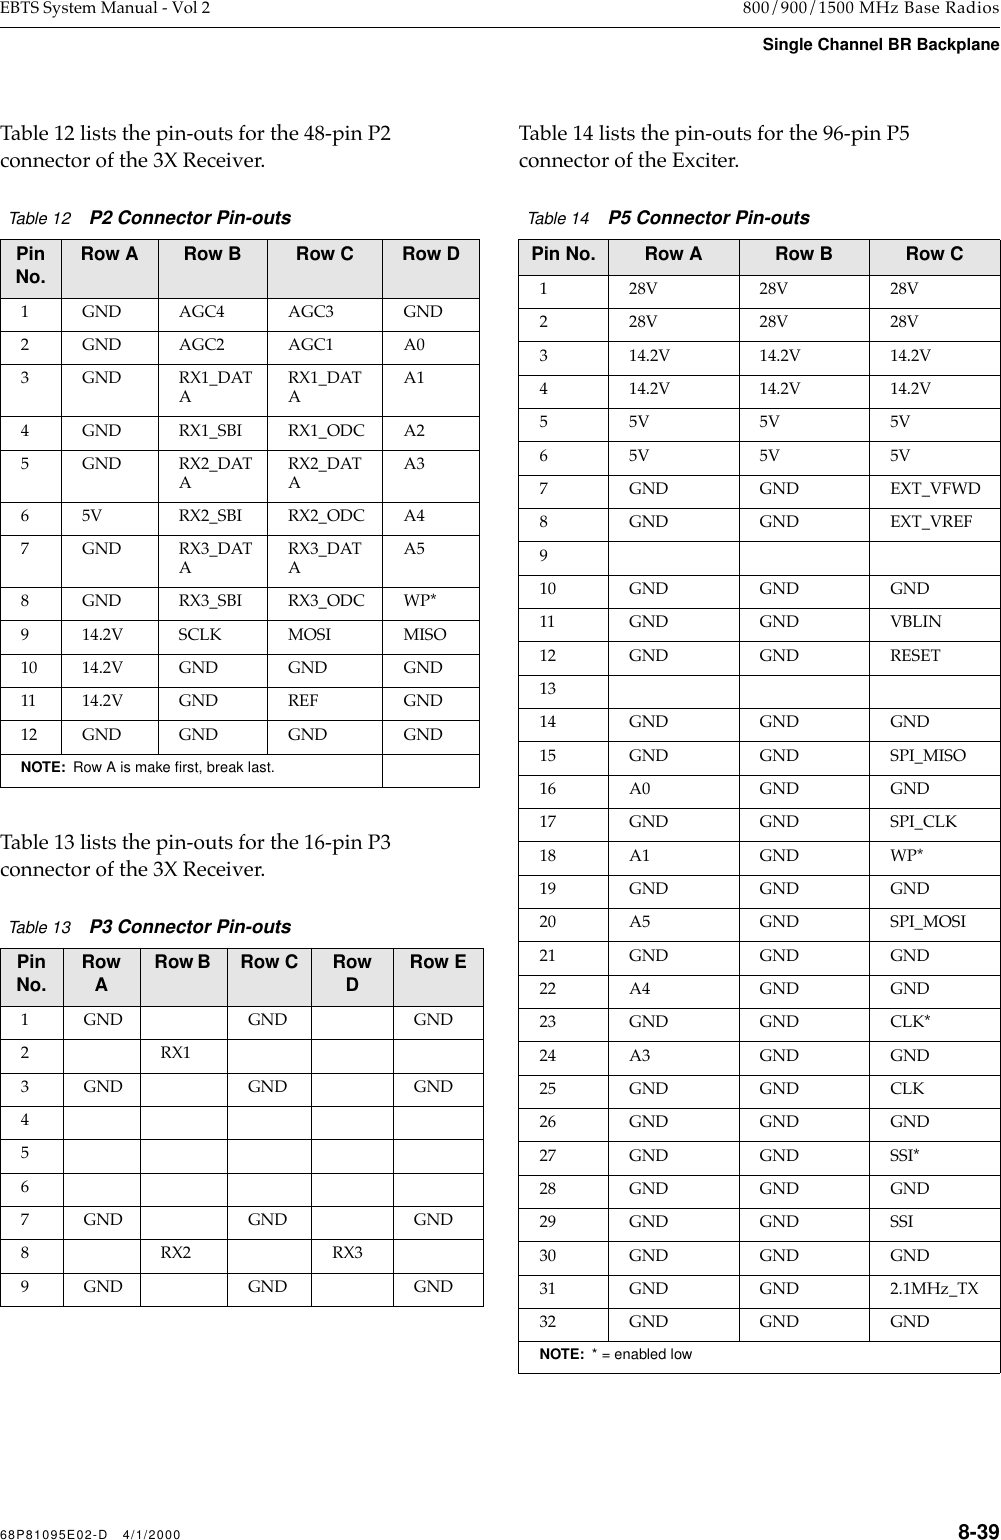 68P81095E02-D   4/1/2000 8-39EBTS System Manual - Vol 2 800/900/1500 MHz Base RadiosSingle Channel BR BackplaneTable 12 lists the pin-outs for the 48-pin P2 connector of the 3X Receiver.Table 13 lists the pin-outs for the 16-pin P3 connector of the 3X Receiver.Table 14 lists the pin-outs for the 96-pin P5 connector of the Exciter.Table 12    P2 Connector Pin-outs Pin No. Row A Row B  Row C Row D1 GND AGC4 AGC3 GND2 GND AGC2 AGC1 A03 GND RX1_DATARX1_DATAA14 GND RX1_SBI RX1_ODC A25 GND RX2_DATARX2_DATAA36 5V RX2_SBI RX2_ODC A47 GND RX3_DATARX3_DATAA58 GND RX3_SBI RX3_ODC WP*9 14.2V SCLK MOSI MISO10 14.2V GND GND GND11 14.2V GND REF GND12 GND GND GND GNDNOTE:  Row A is make ﬁrst, break last.Table 13    P3 Connector Pin-outs Pin No. Row ARow B  Row C Row DRow E1 GND GND GND2 RX13 GND GND GND4567 GND GND GND8 RX2 RX39 GND GND GNDTable 14    P5 Connector Pin-outsPin No. Row A Row B Row C1 28V 28V 28V2 28V 28V 28V3 14.2V 14.2V 14.2V4 14.2V 14.2V 14.2V55V5V5V65V5V5V7 GND GND EXT_VFWD8 GND GND EXT_VREF910 GND GND GND11 GND GND VBLIN12 GND GND RESET1314 GND GND GND15 GND GND SPI_MISO16 A0 GND GND17 GND GND SPI_CLK18 A1 GND WP*19 GND GND GND20 A5 GND SPI_MOSI21 GND GND GND22 A4 GND GND23 GND GND CLK*24 A3 GND GND25 GND GND CLK26 GND GND GND27 GND GND SSI*28 GND GND GND29 GND GND SSI30 GND GND GND31 GND GND 2.1MHz_TX32 GND GND GNDNOTE:  * = enabled low